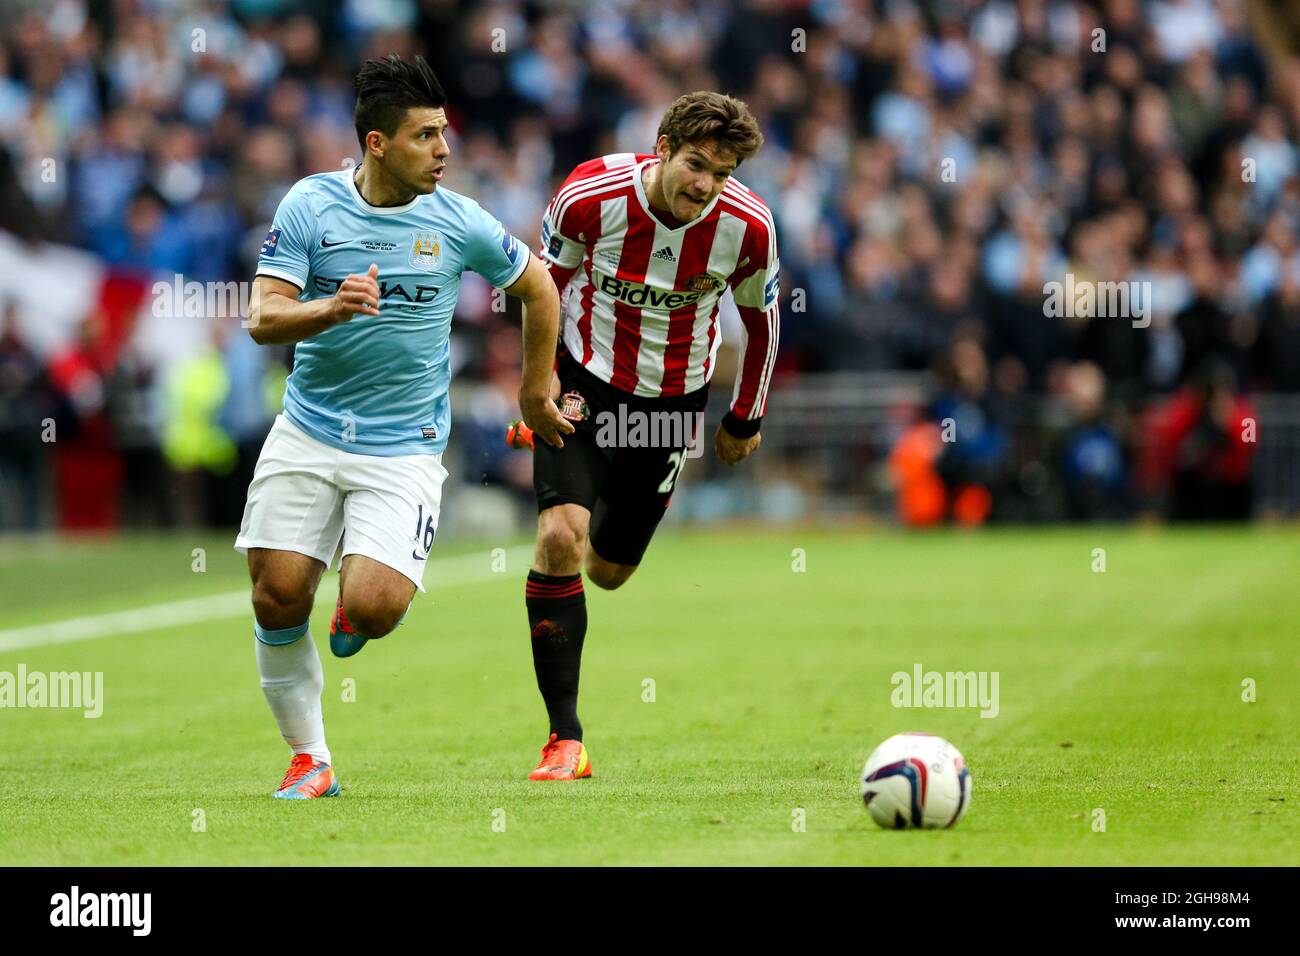 Manchester City's Sergio Aguero and Sunderland's Marcos Alonso during the League Cup Final match between Manchester City and Sunderland at Wembley Stadium, London, UK on March 2, 2014. Stock Photo